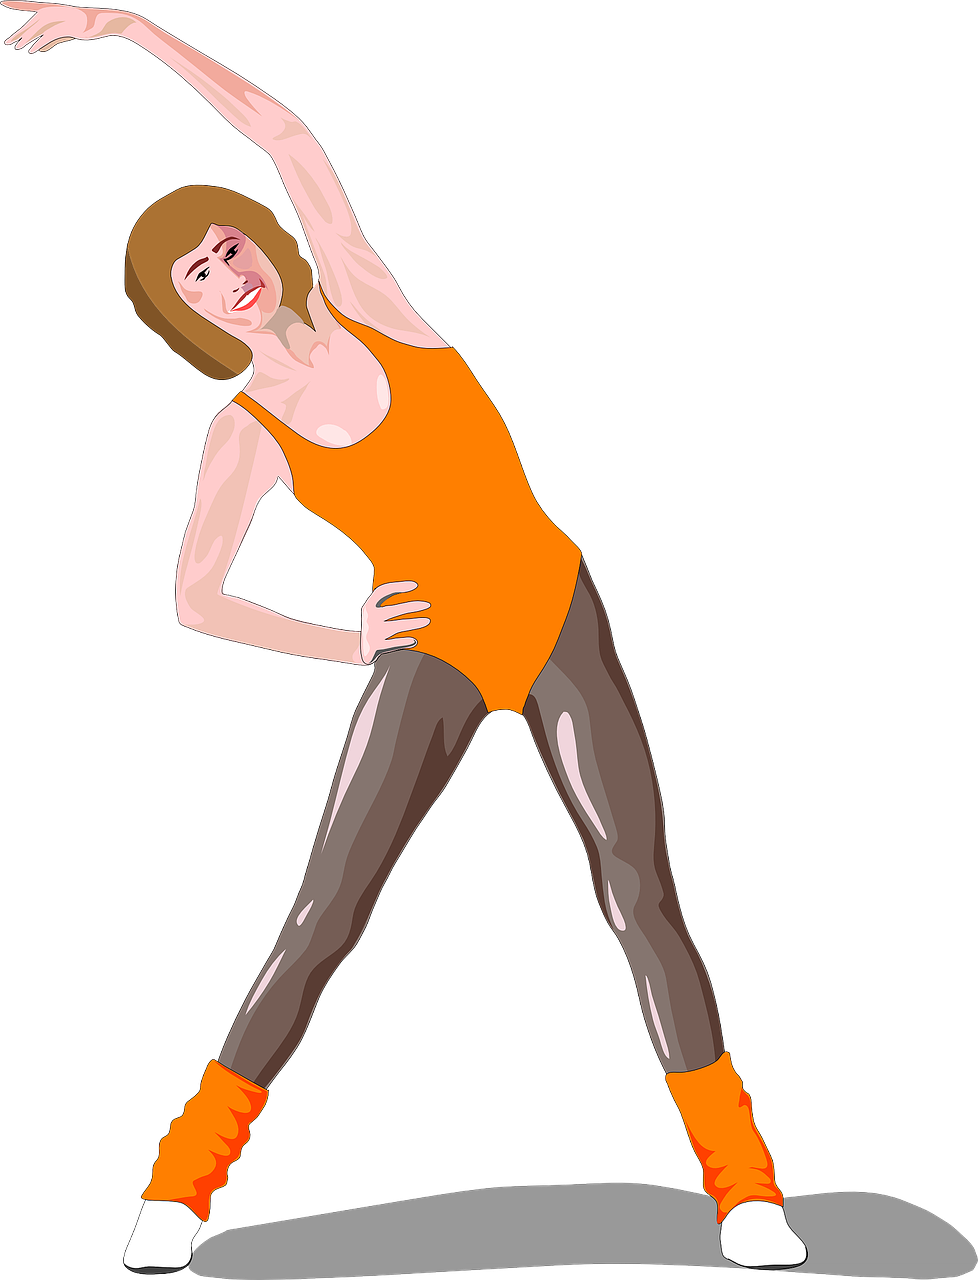 Vector Racquetball Aerobics Exercisers File PNG